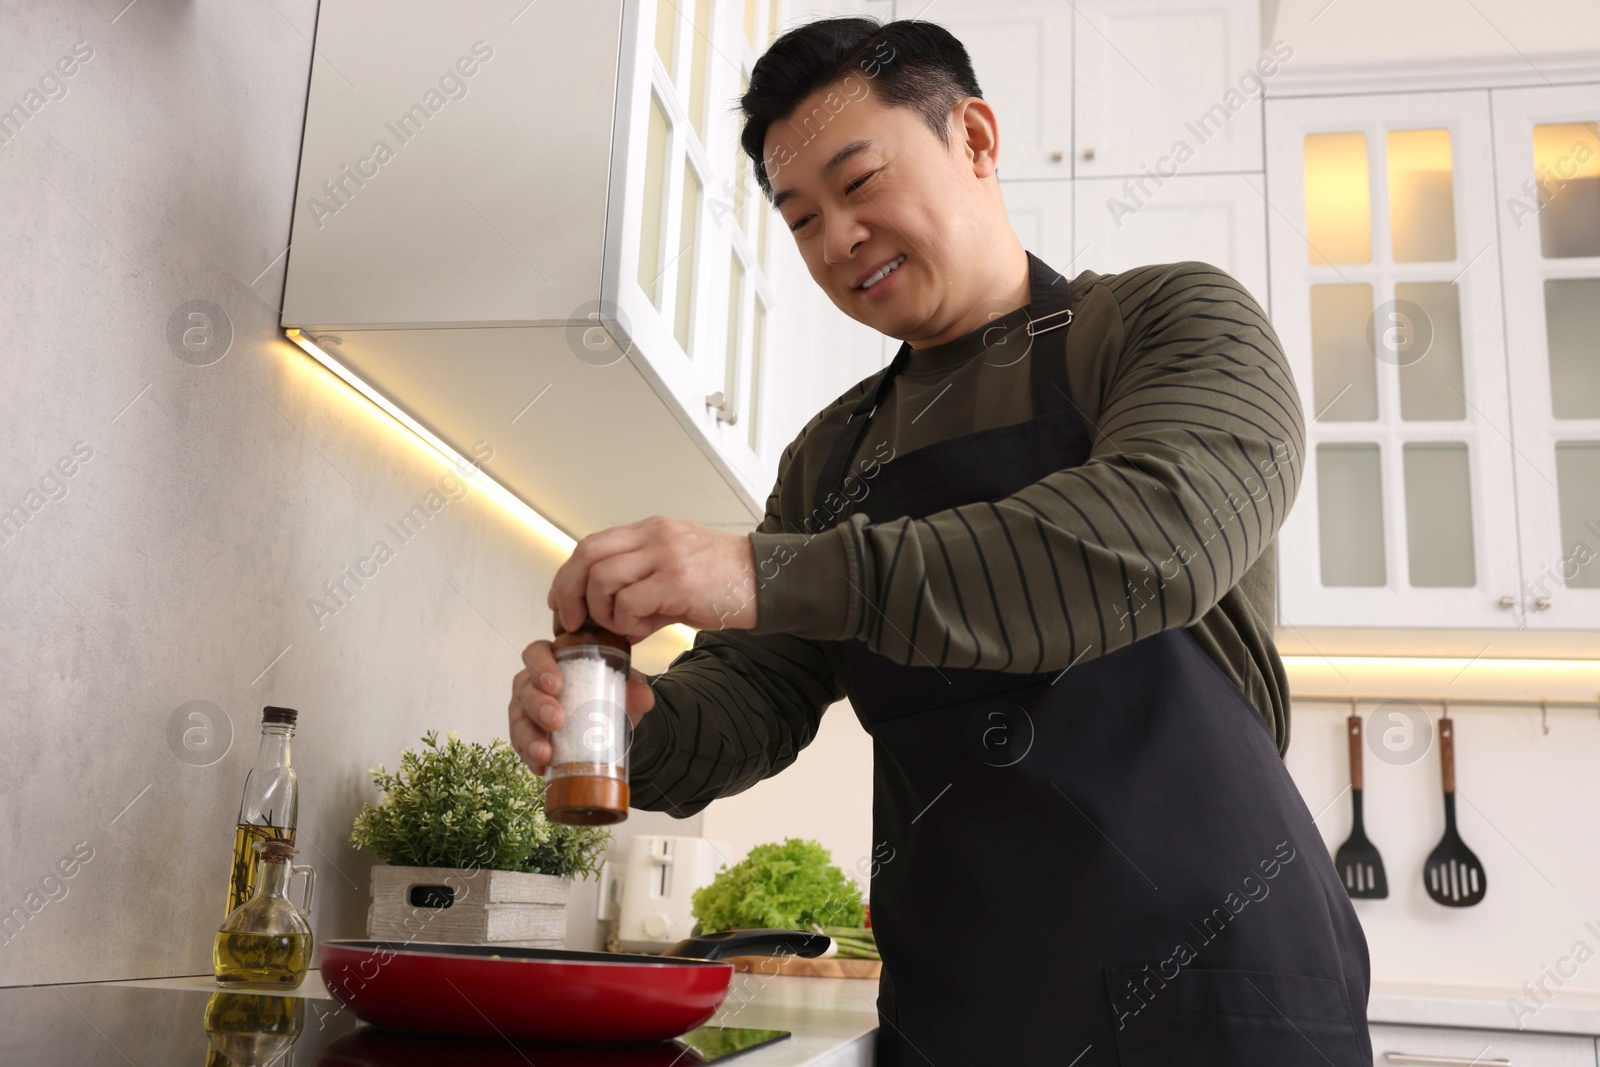 Photo of Cooking process. Man adding salt into frying pan in kitchen, low angle view